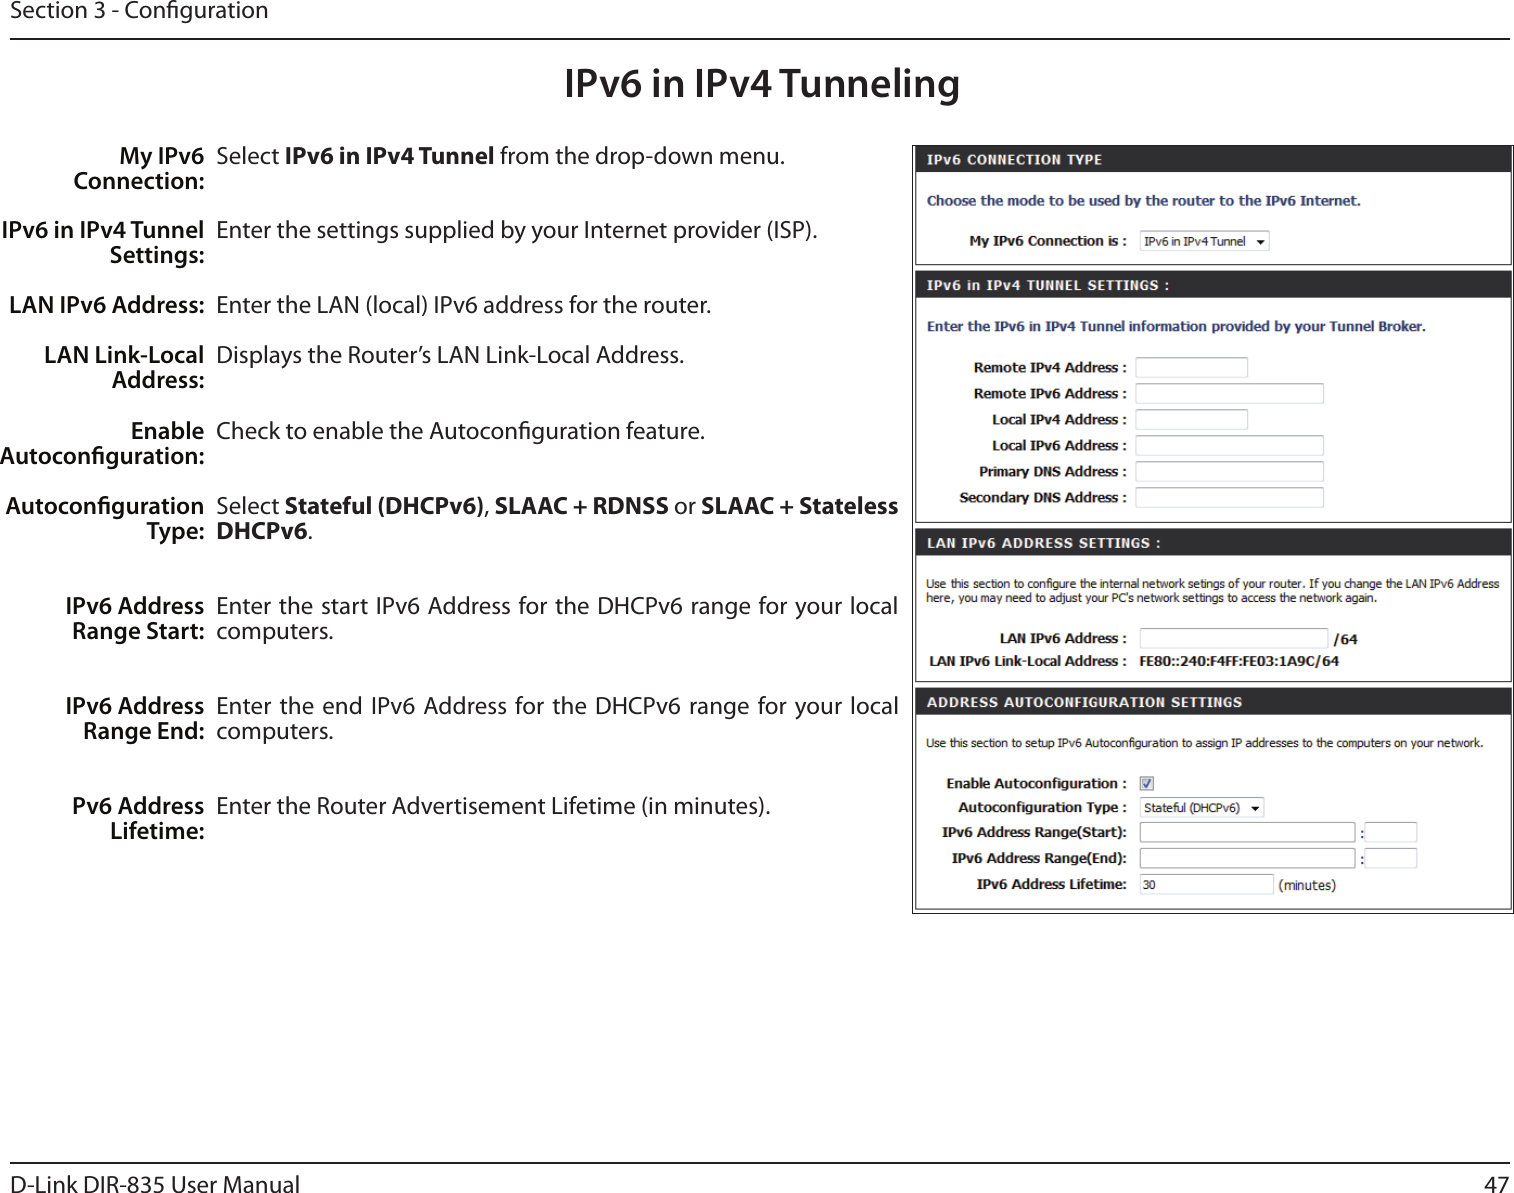 47D-Link DIR-835 User ManualSection 3 - CongurationIPv6 in IPv4 TunnelingSelect IPv6 in IPv4 Tunnel from the drop-down menu.Enter the settings supplied by your Internet provider (ISP). Enter the LAN (local) IPv6 address for the router. Displays the Router’s LAN Link-Local Address.Check to enable the Autoconguration feature.Select Stateful (DHCPv6), SLAAC + RDNSS or SLAAC + Stateless DHCPv6. Enter the start IPv6 Address for the DHCPv6 range for your local computers.Enter the end  IPv6  Address for the DHCPv6  range for your local computers.Enter the Router Advertisement Lifetime (in minutes).My IPv6 Connection:IPv6 in IPv4 Tunnel Settings:LAN IPv6 Address:LAN Link-Local Address:Enable Autoconguration:Autoconguration Type:IPv6 Address Range Start:IPv6 Address Range End:Pv6 Address Lifetime: